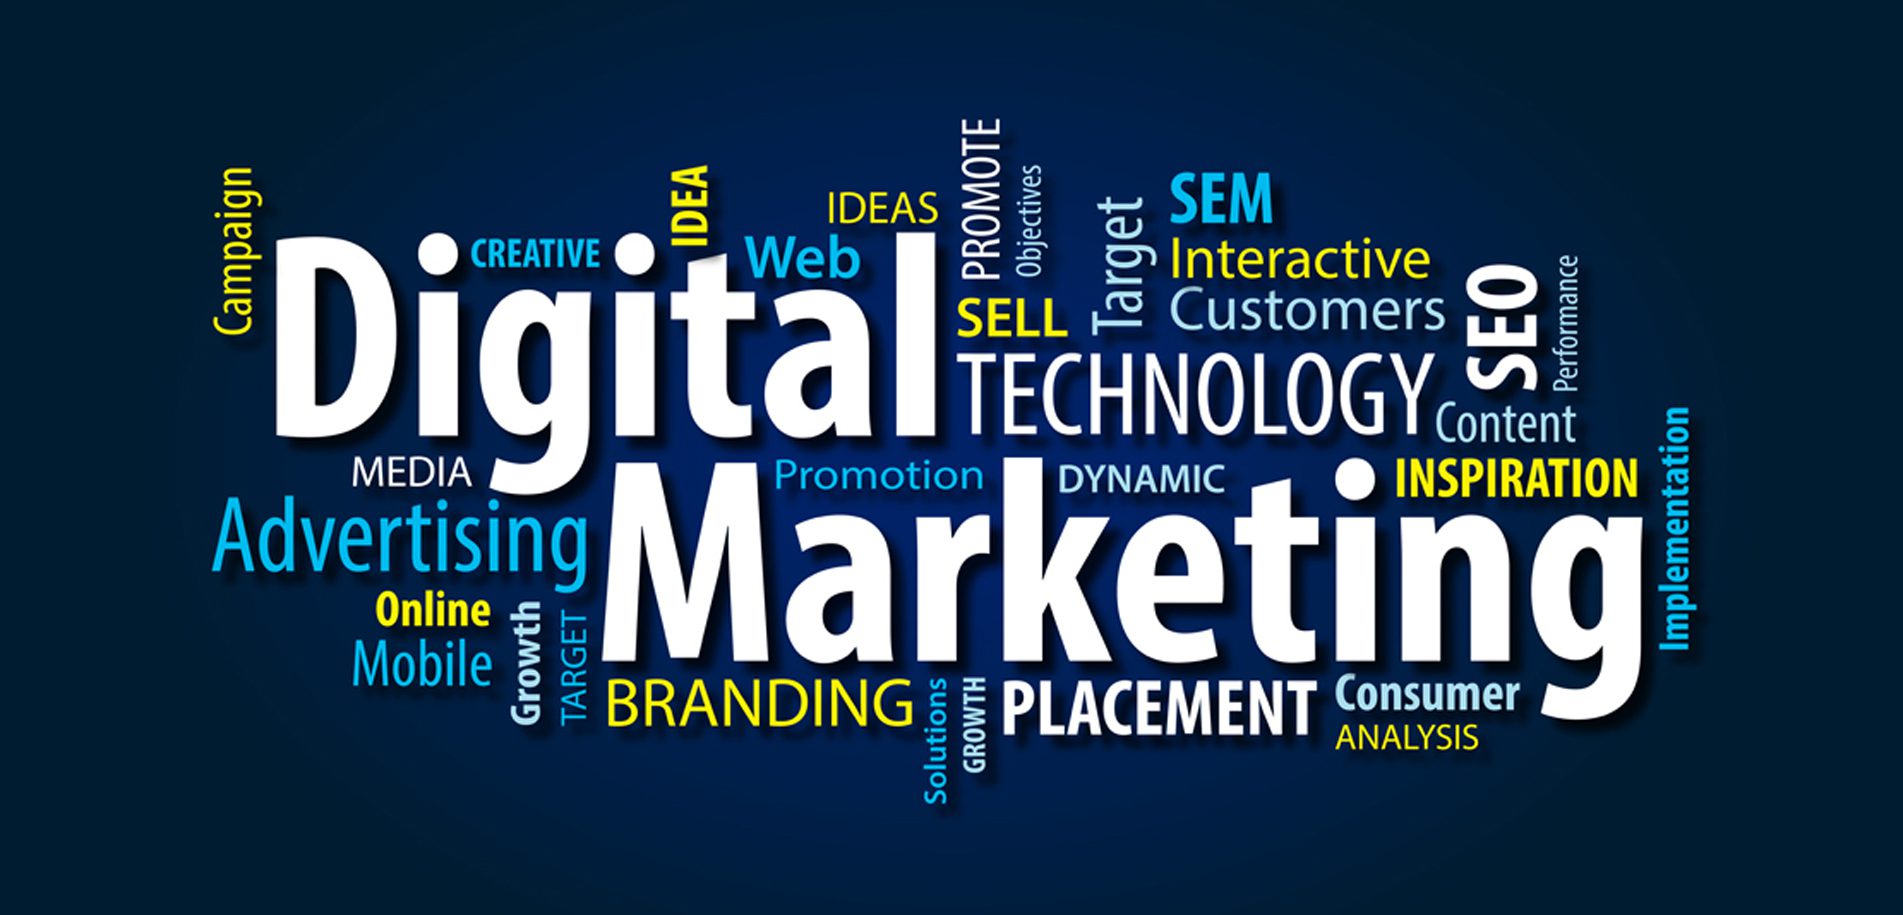 Here are the main types of digital marketing you should consider for your business.